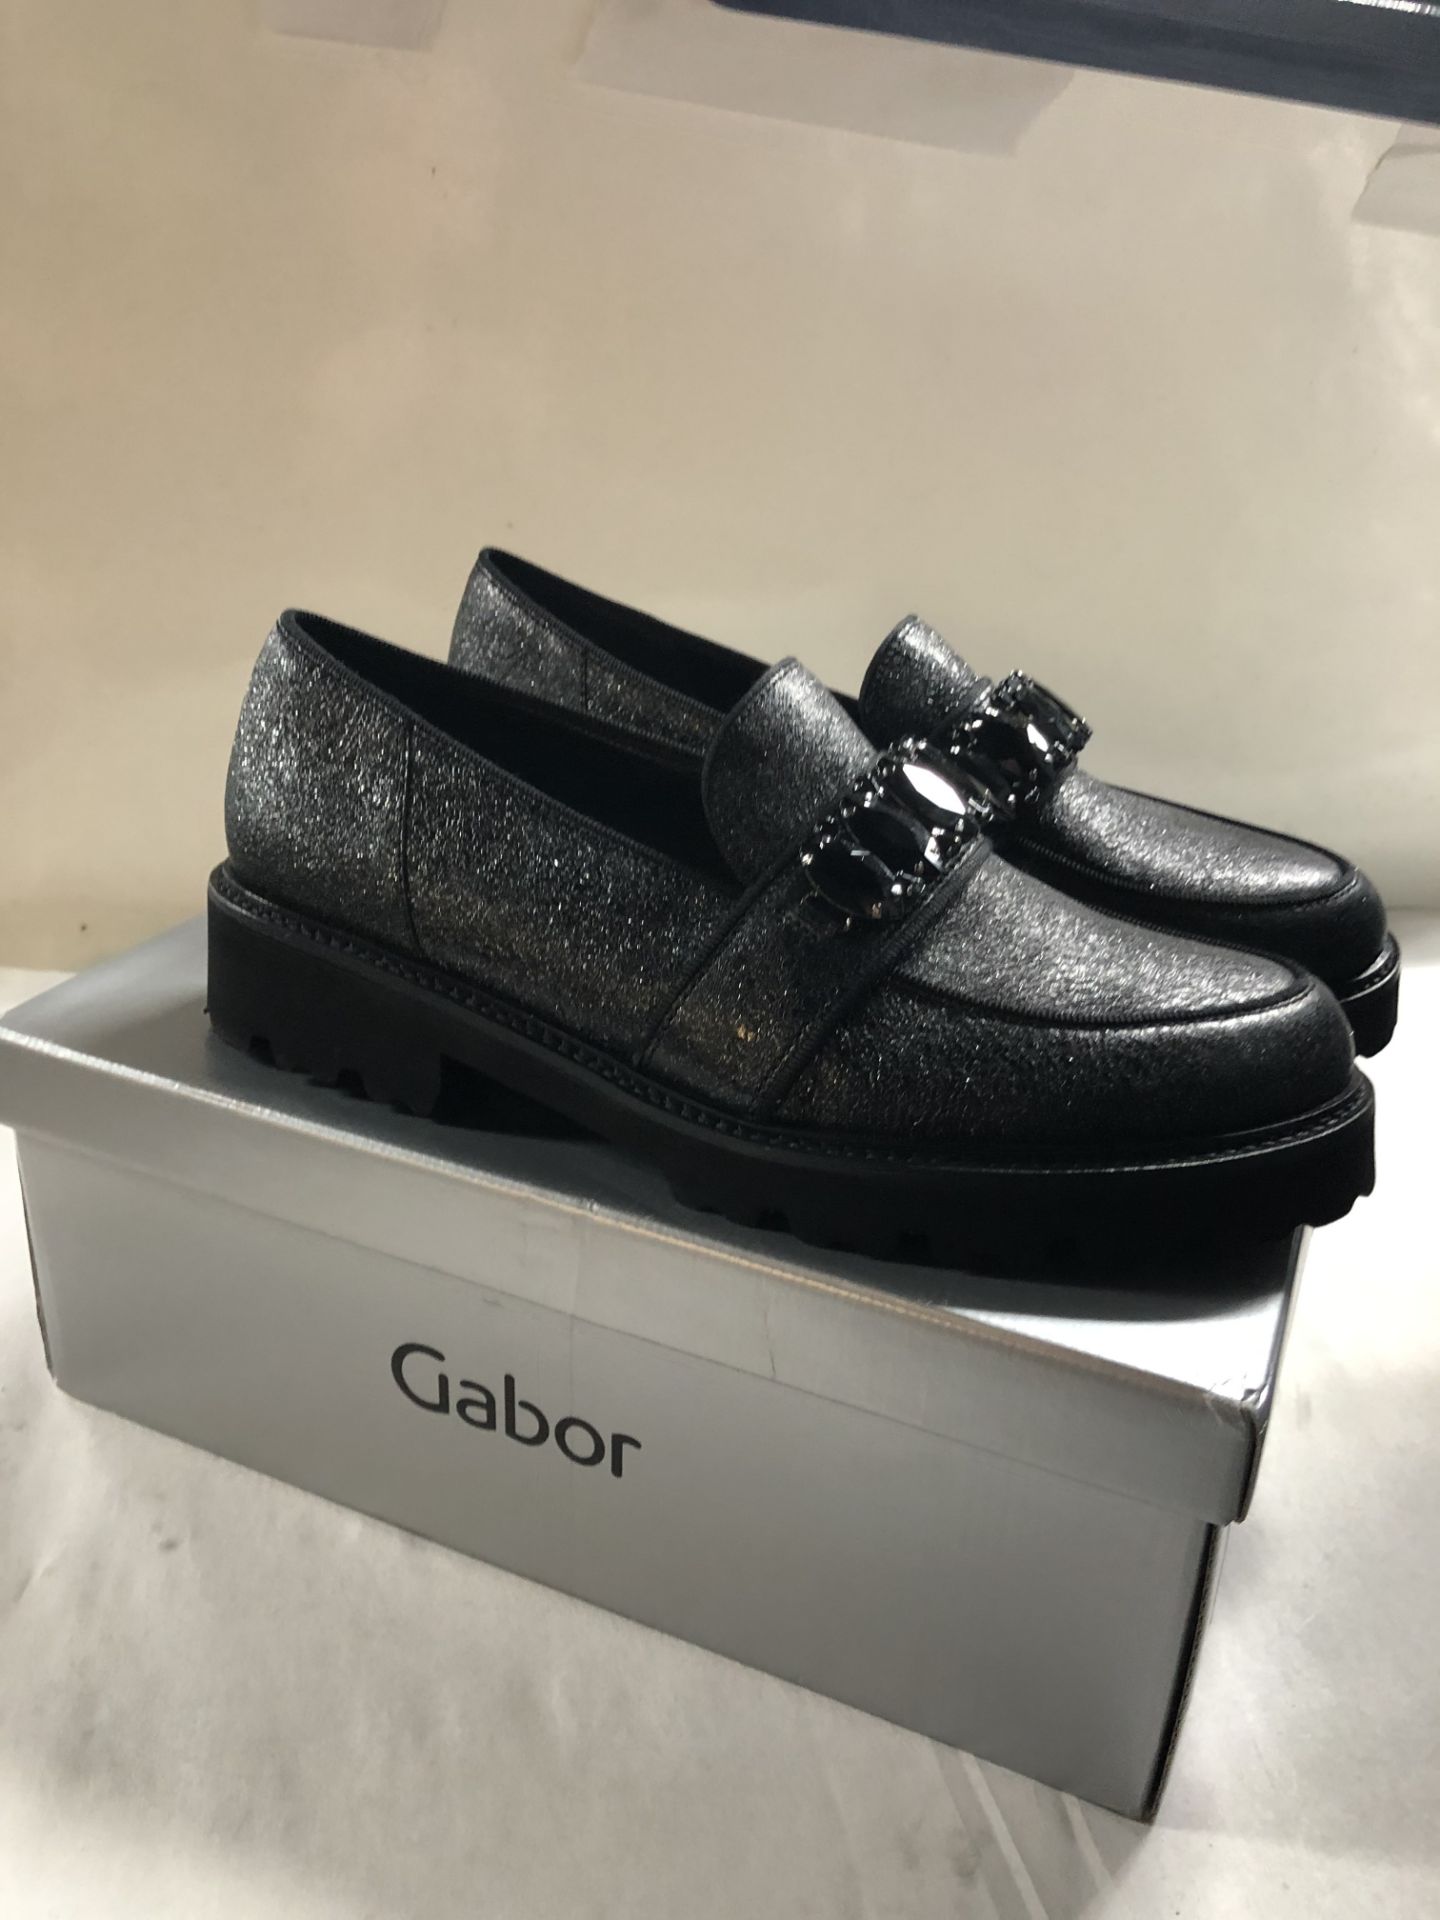 Gabor Loafers. UK 6 - Image 2 of 3